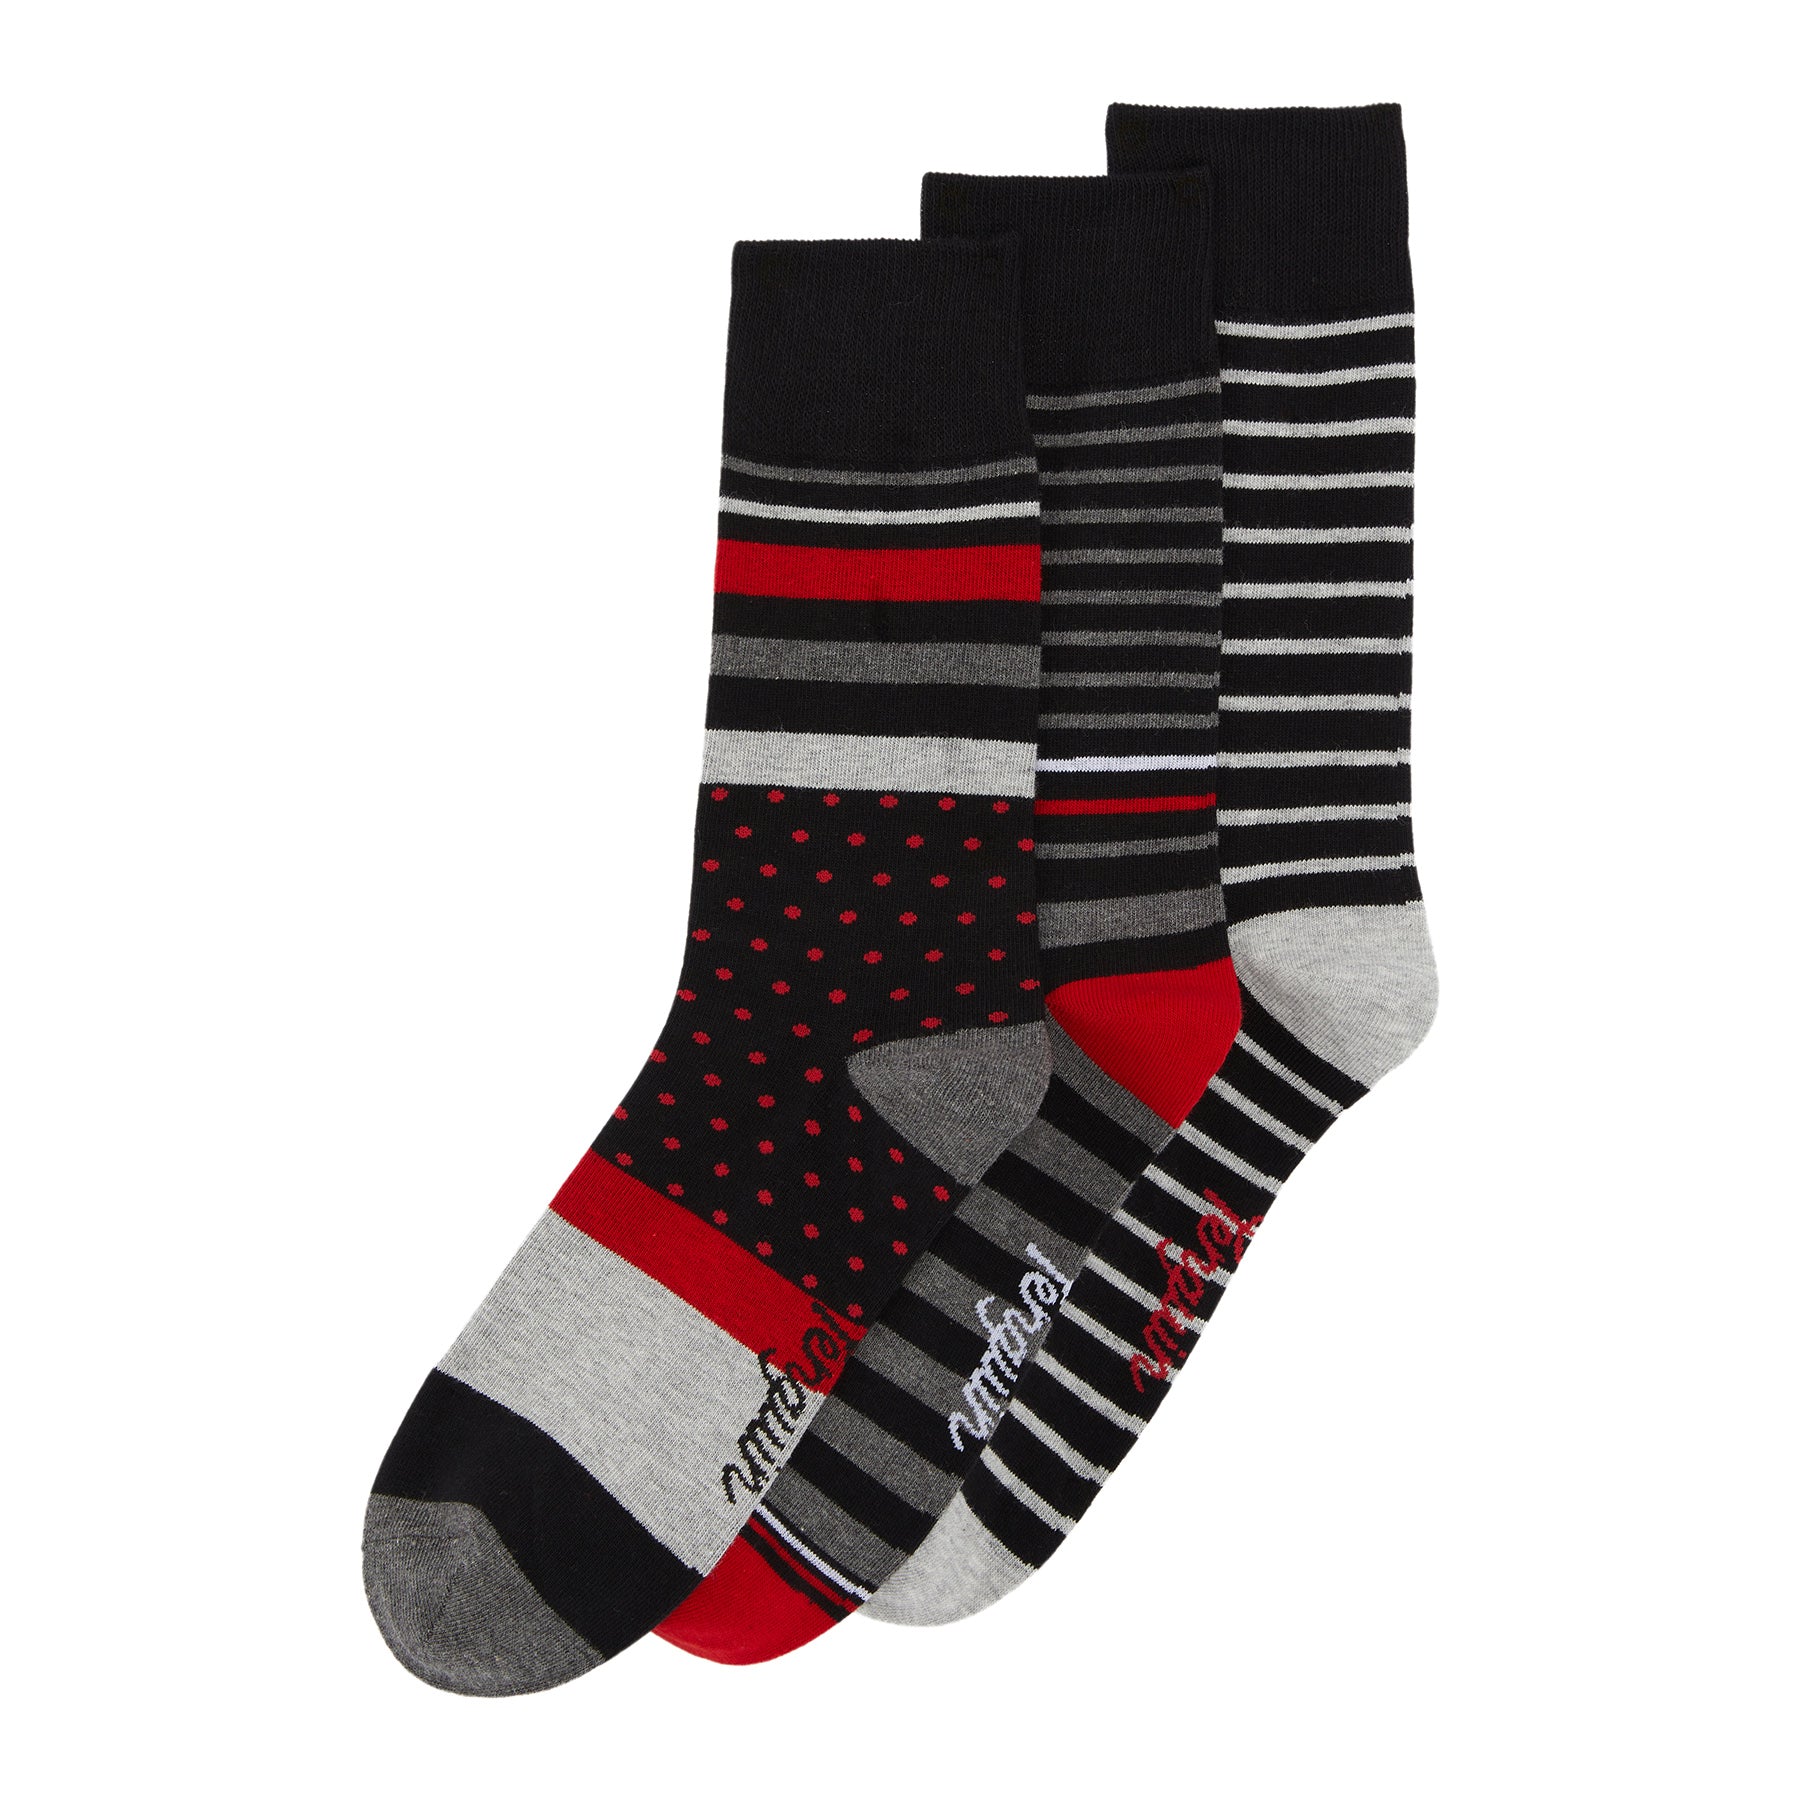 View 3 Pack Spot And Stripe Design Ankle Socks In Black And Red information